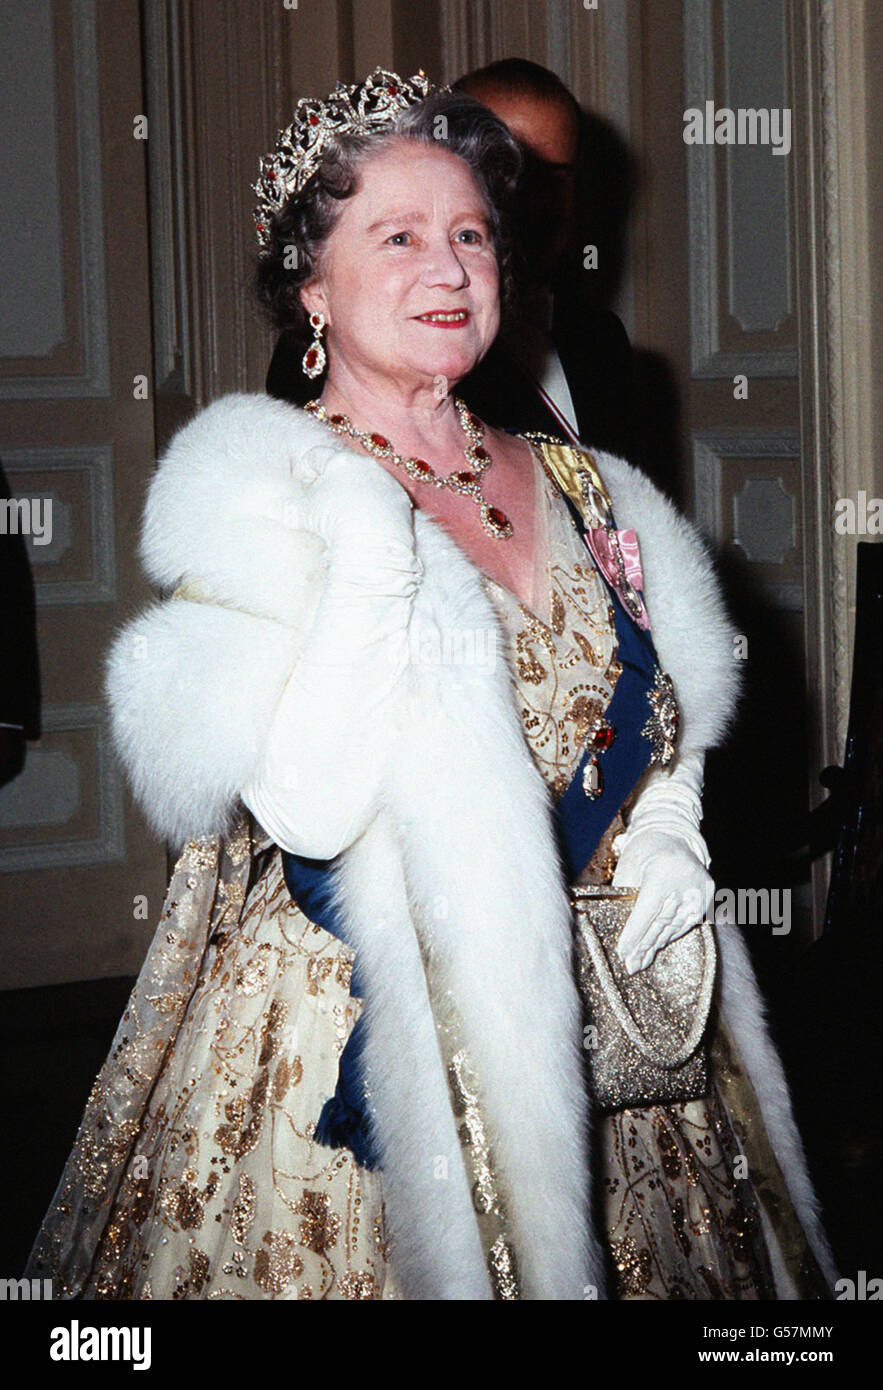 The Queen Mother arrives at the Italian Embassy, London, for a banquet hosted by President Saragat of Italy. Stock Photo